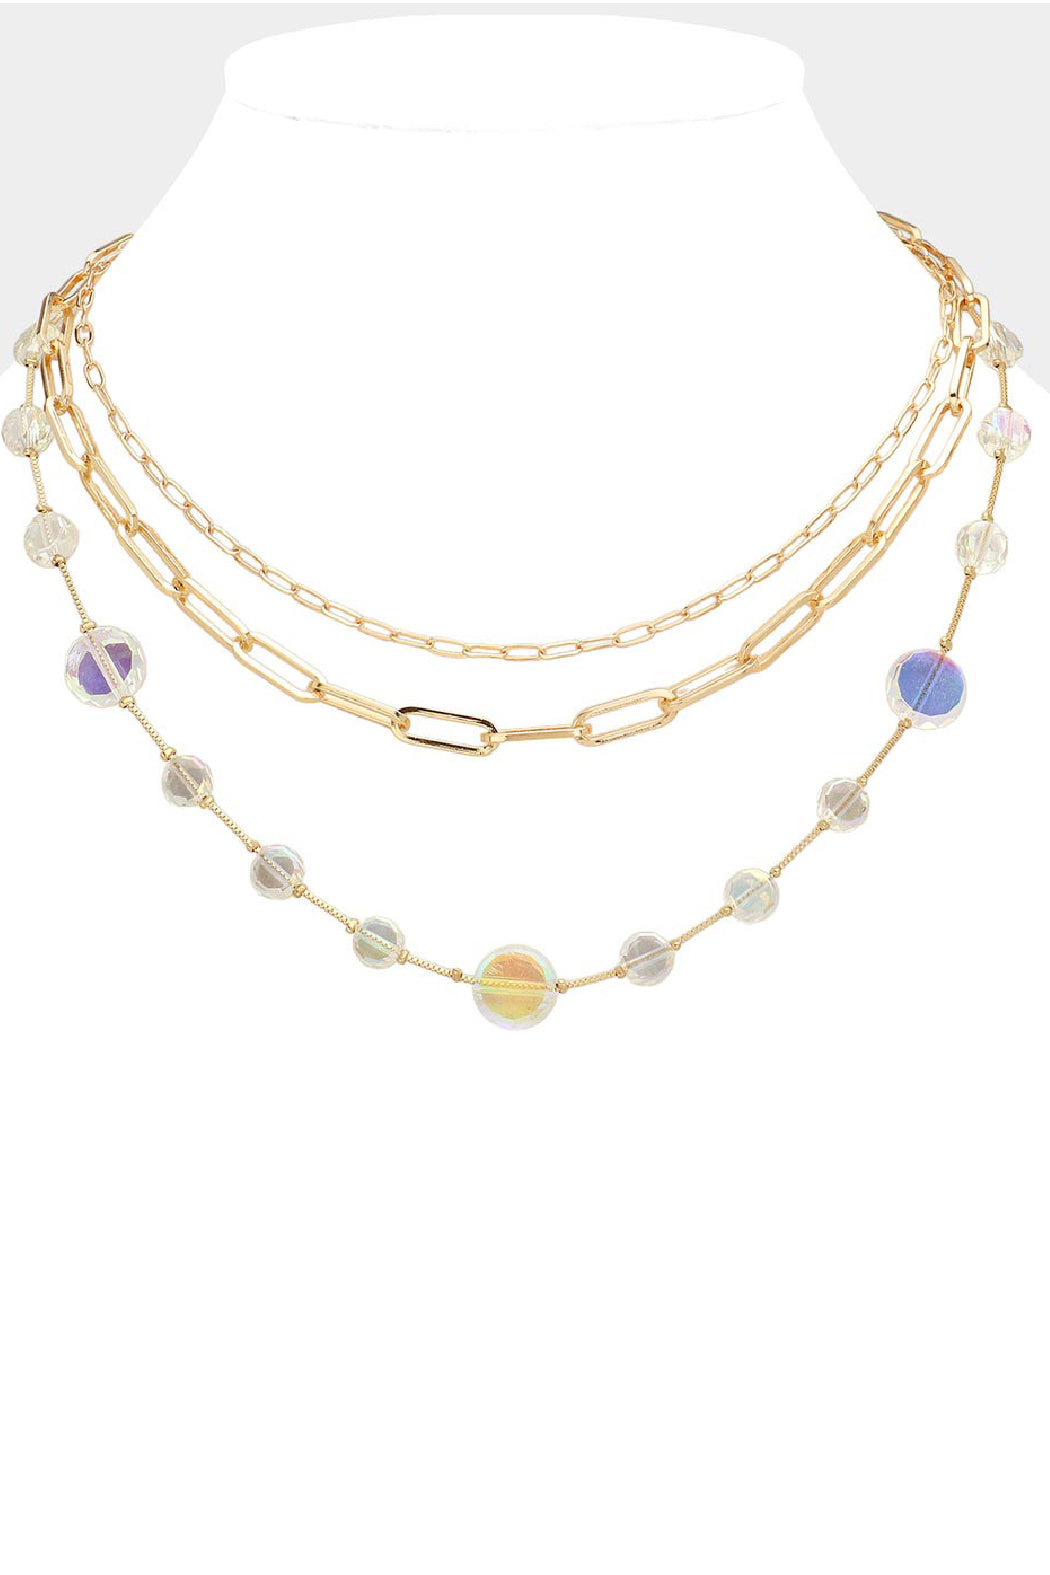 3 Strand Faceted Glass Necklace